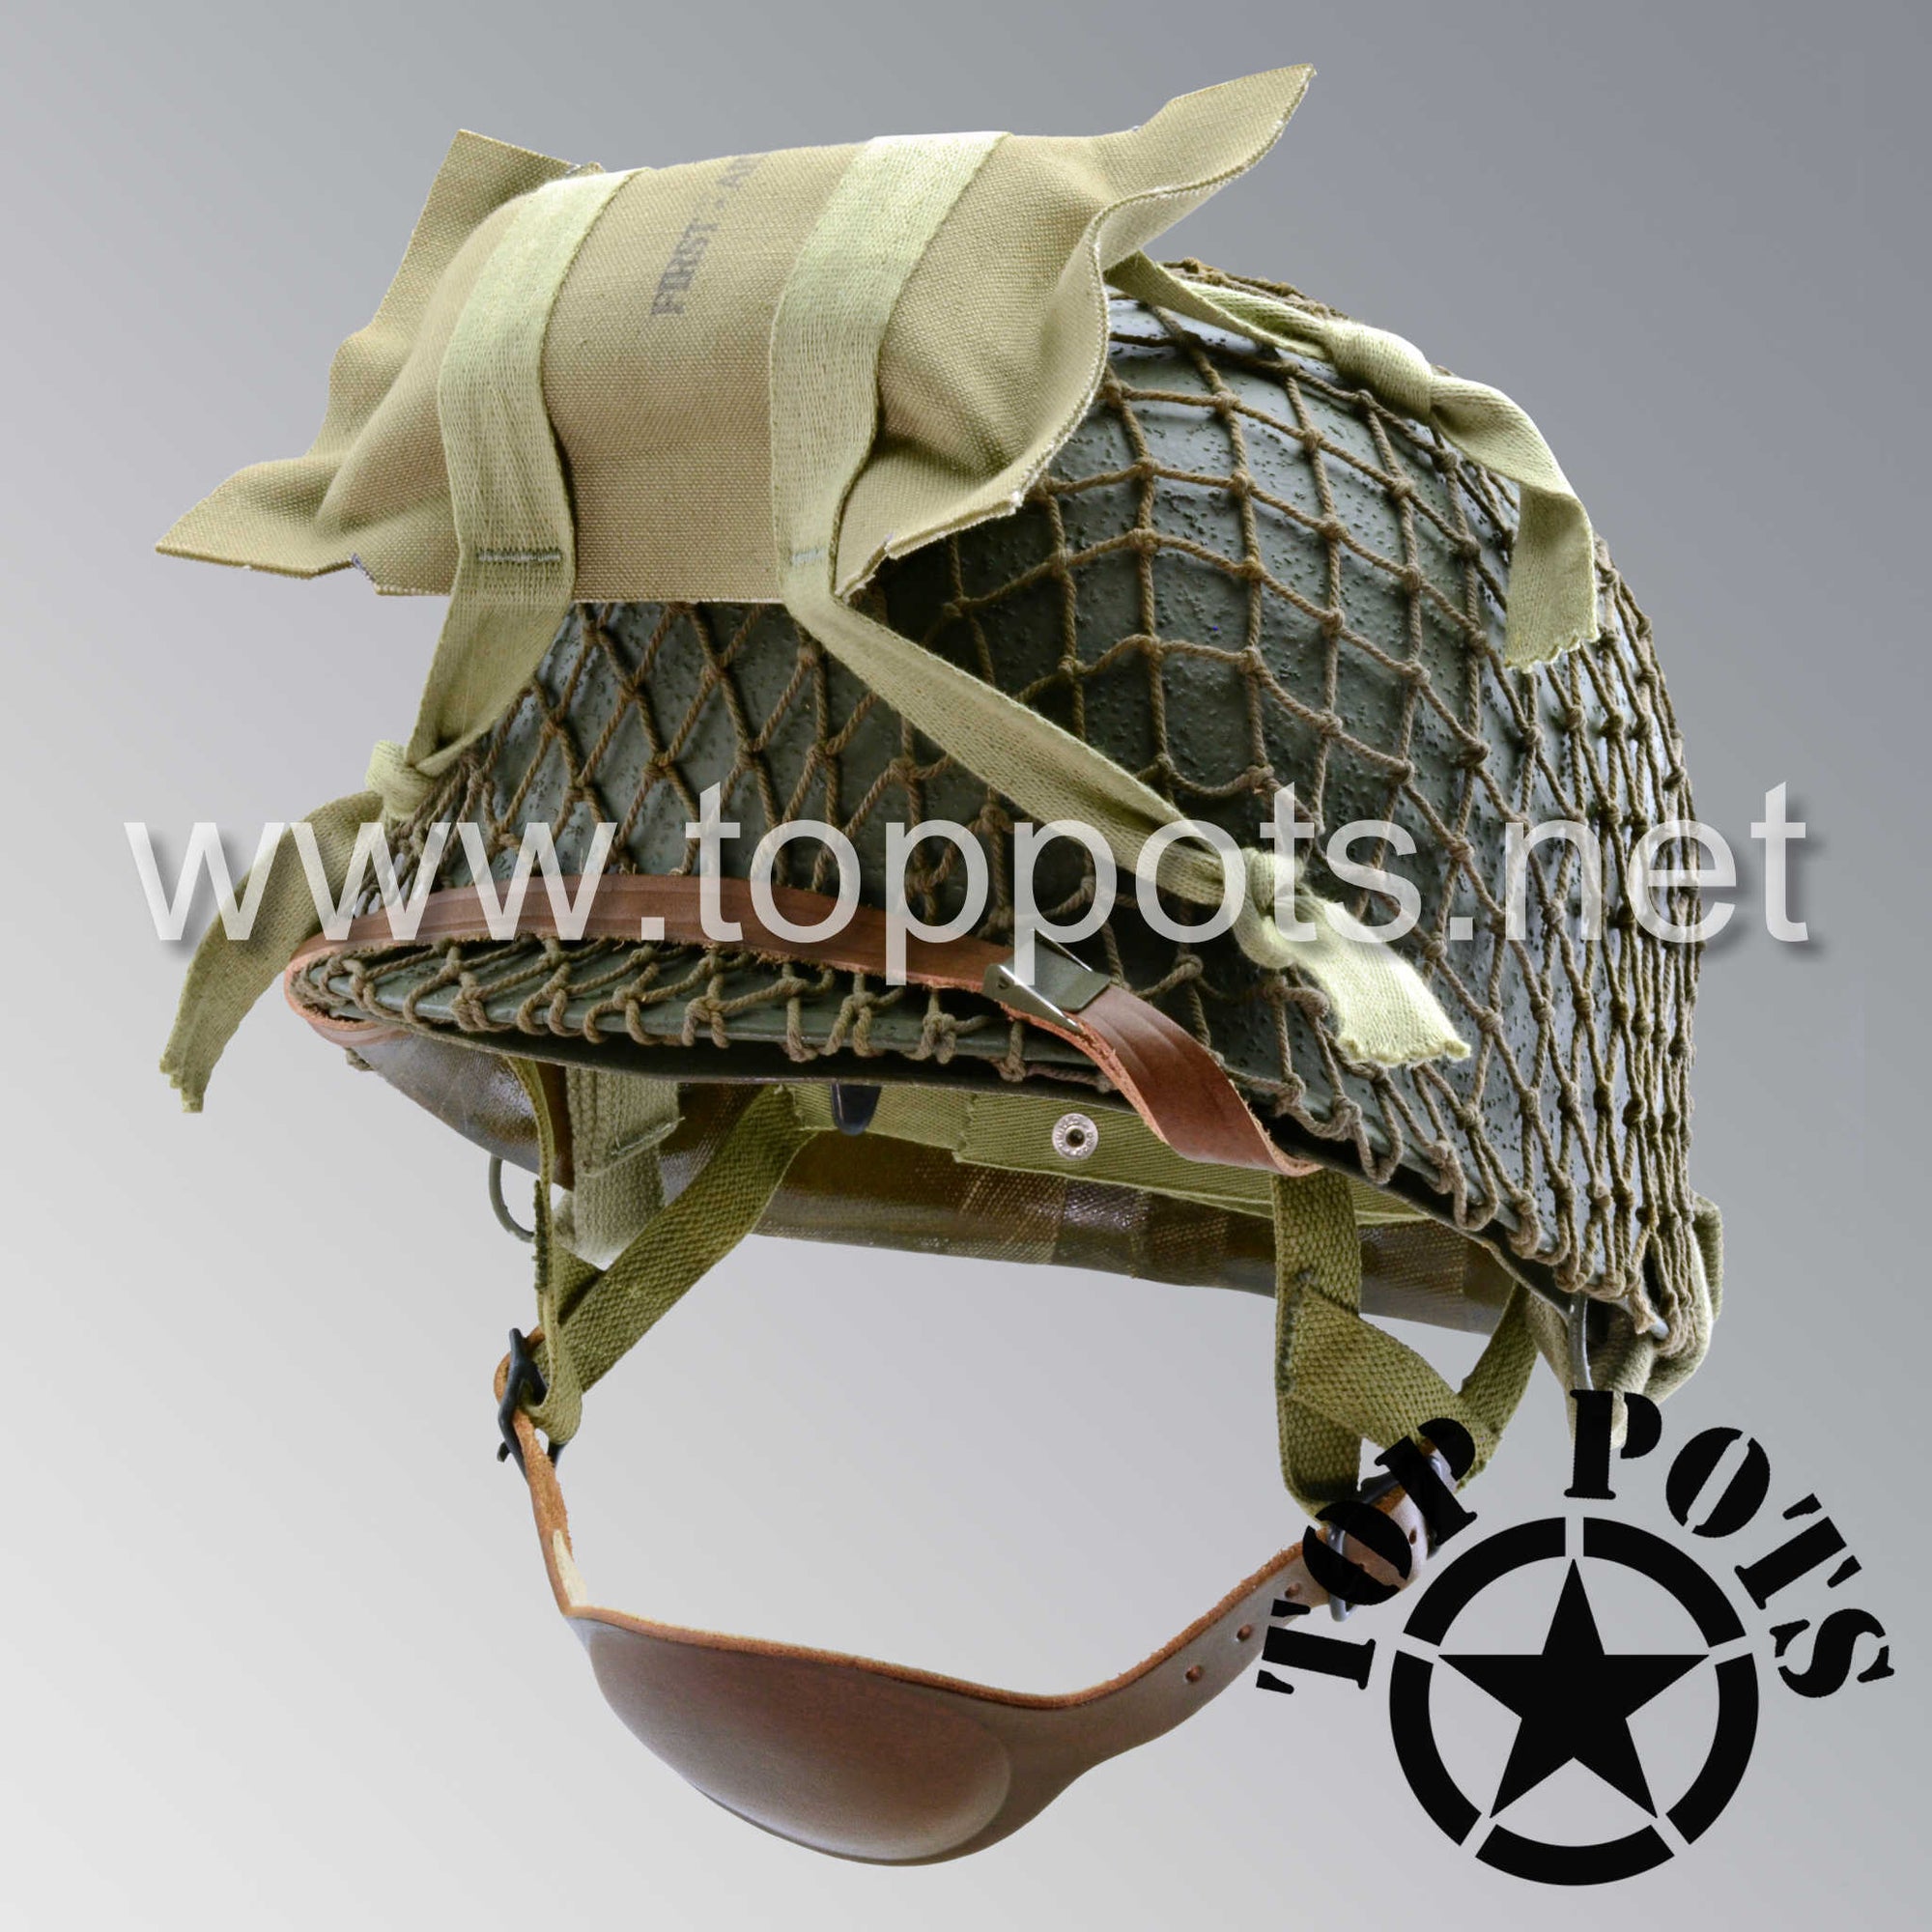 WWII US Army Restored Original M2 Paratrooper Airborne Helmet D Bale Shell and Liner with Khaki Net and Medic Pack